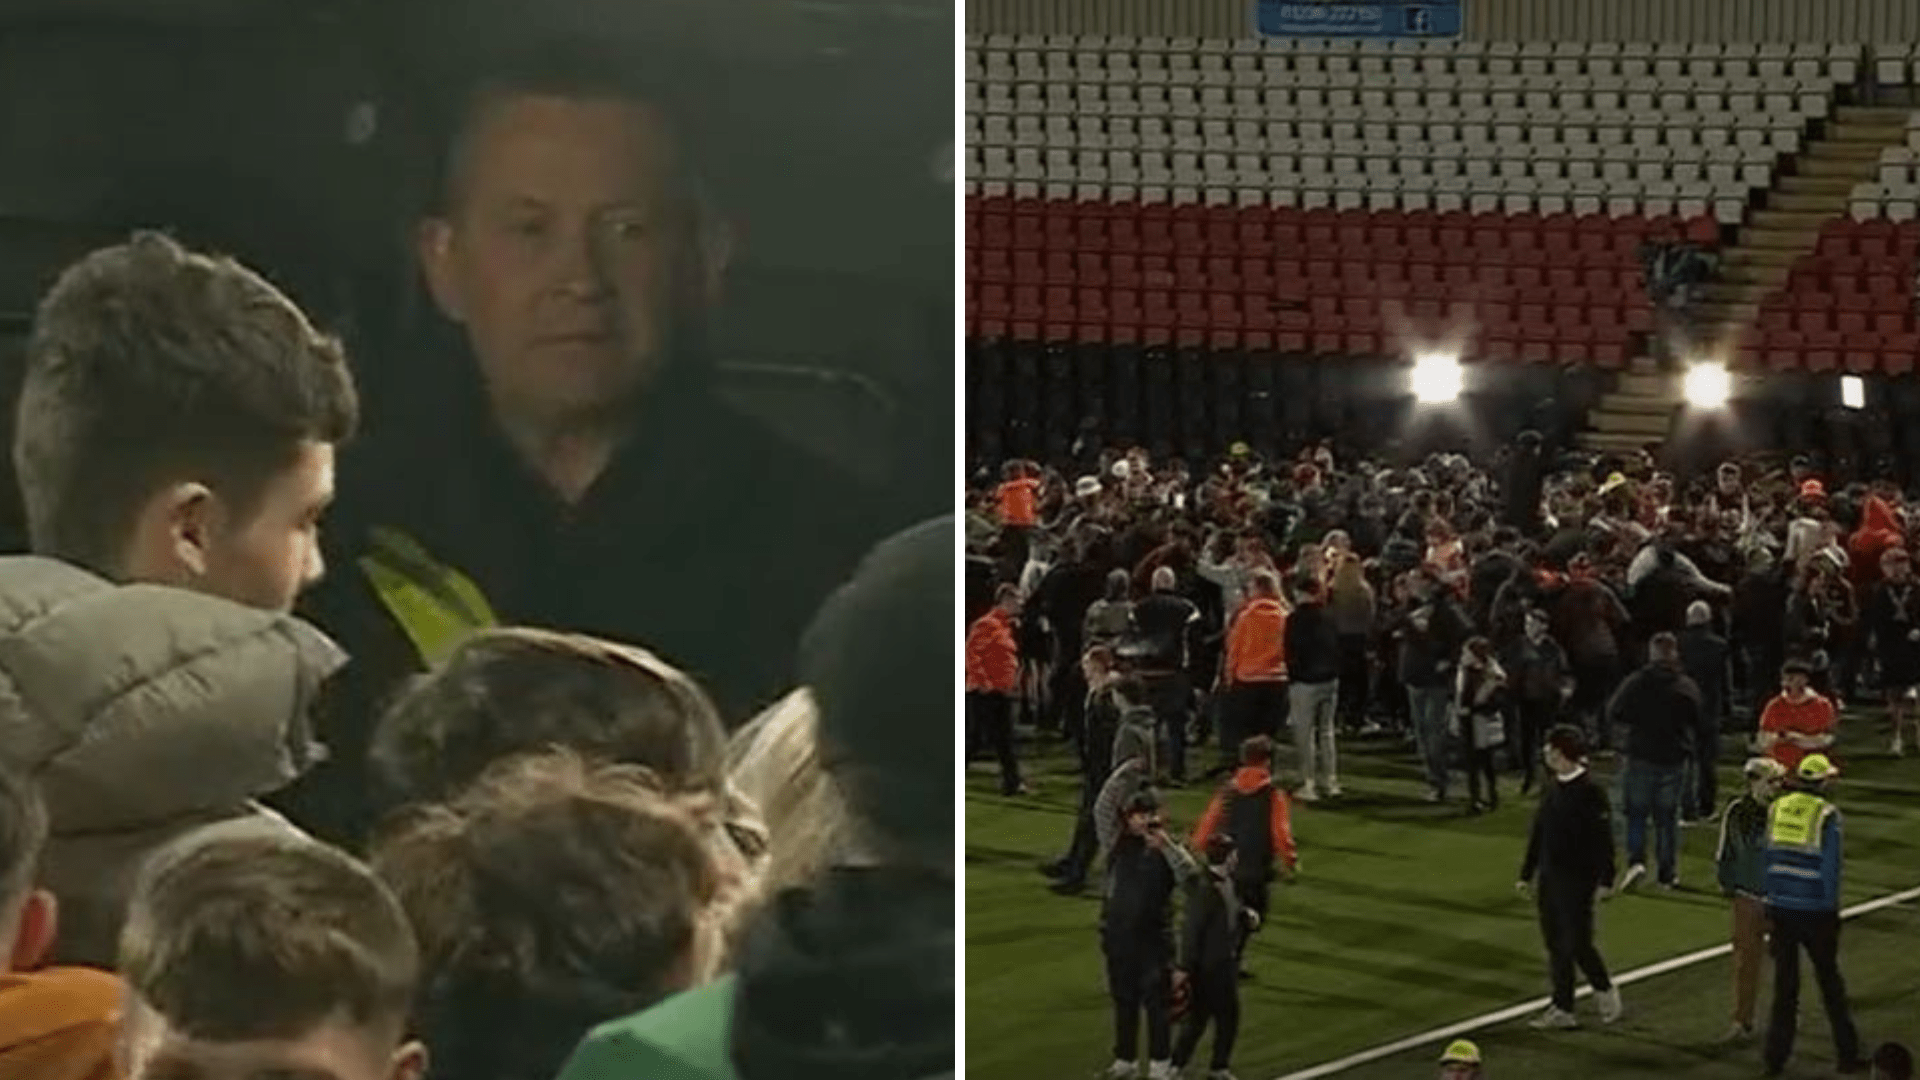 'That wasn't nice' says ex-Dundee United star after pundits are swarmed by fans